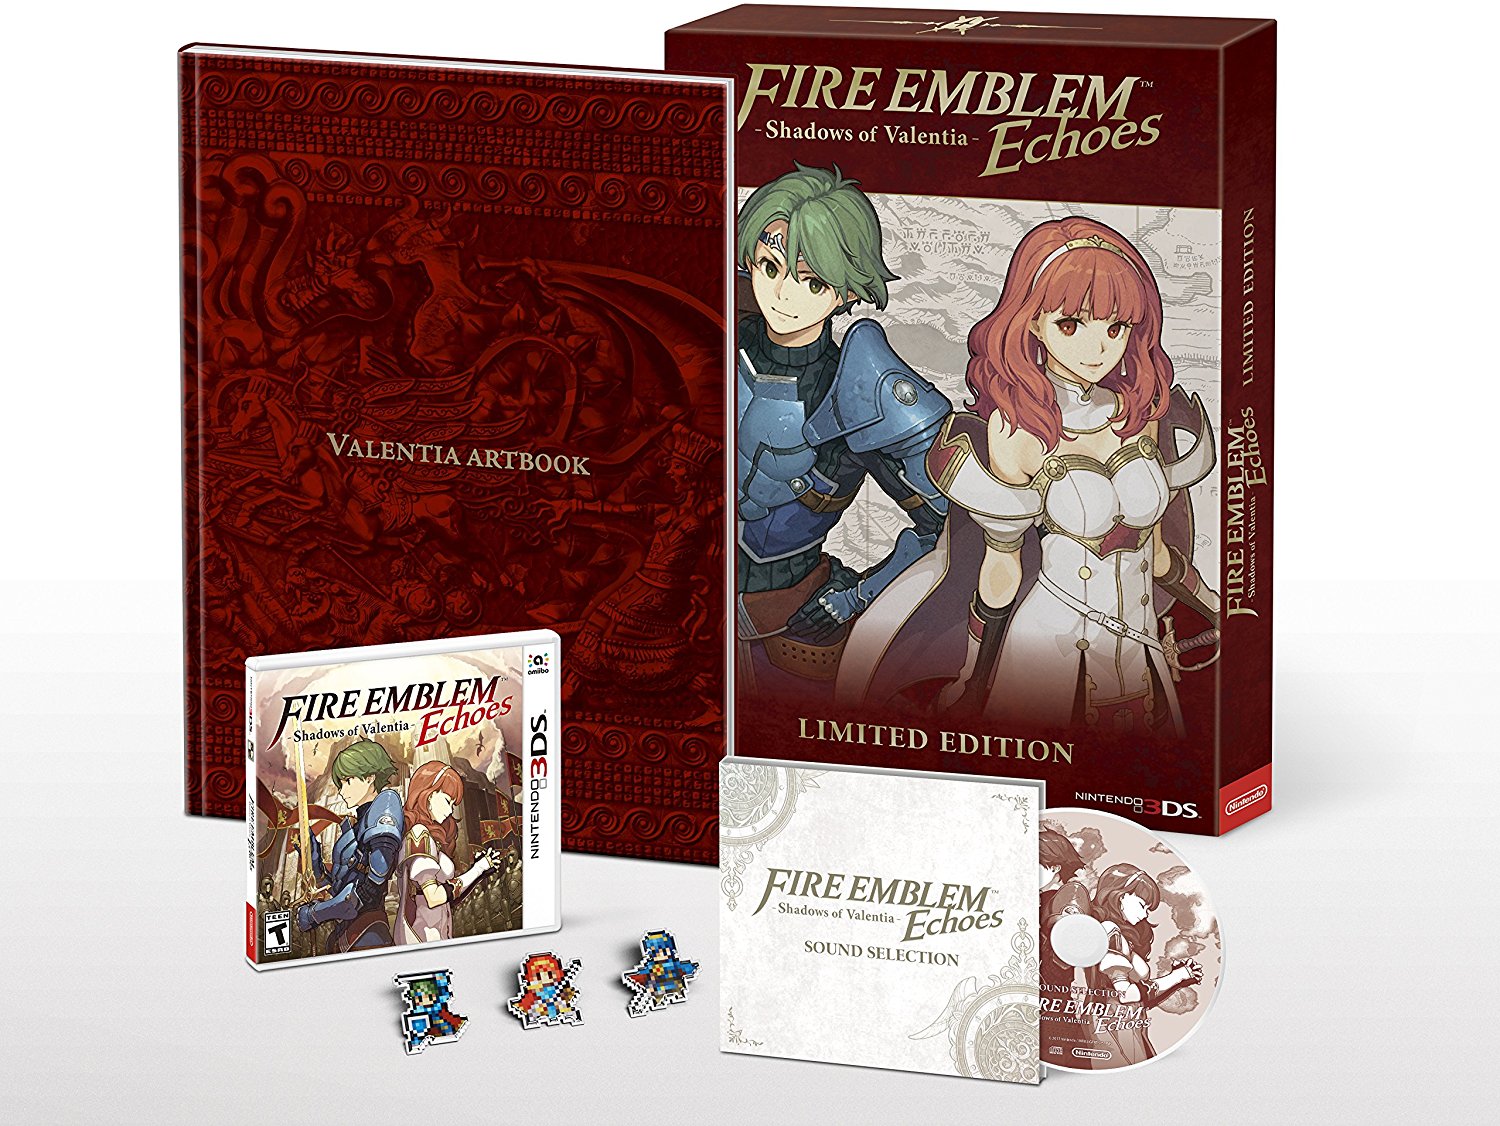 Limited Edition Bundle on the way for Fire Emblem Echoes: Shadows of Valentia